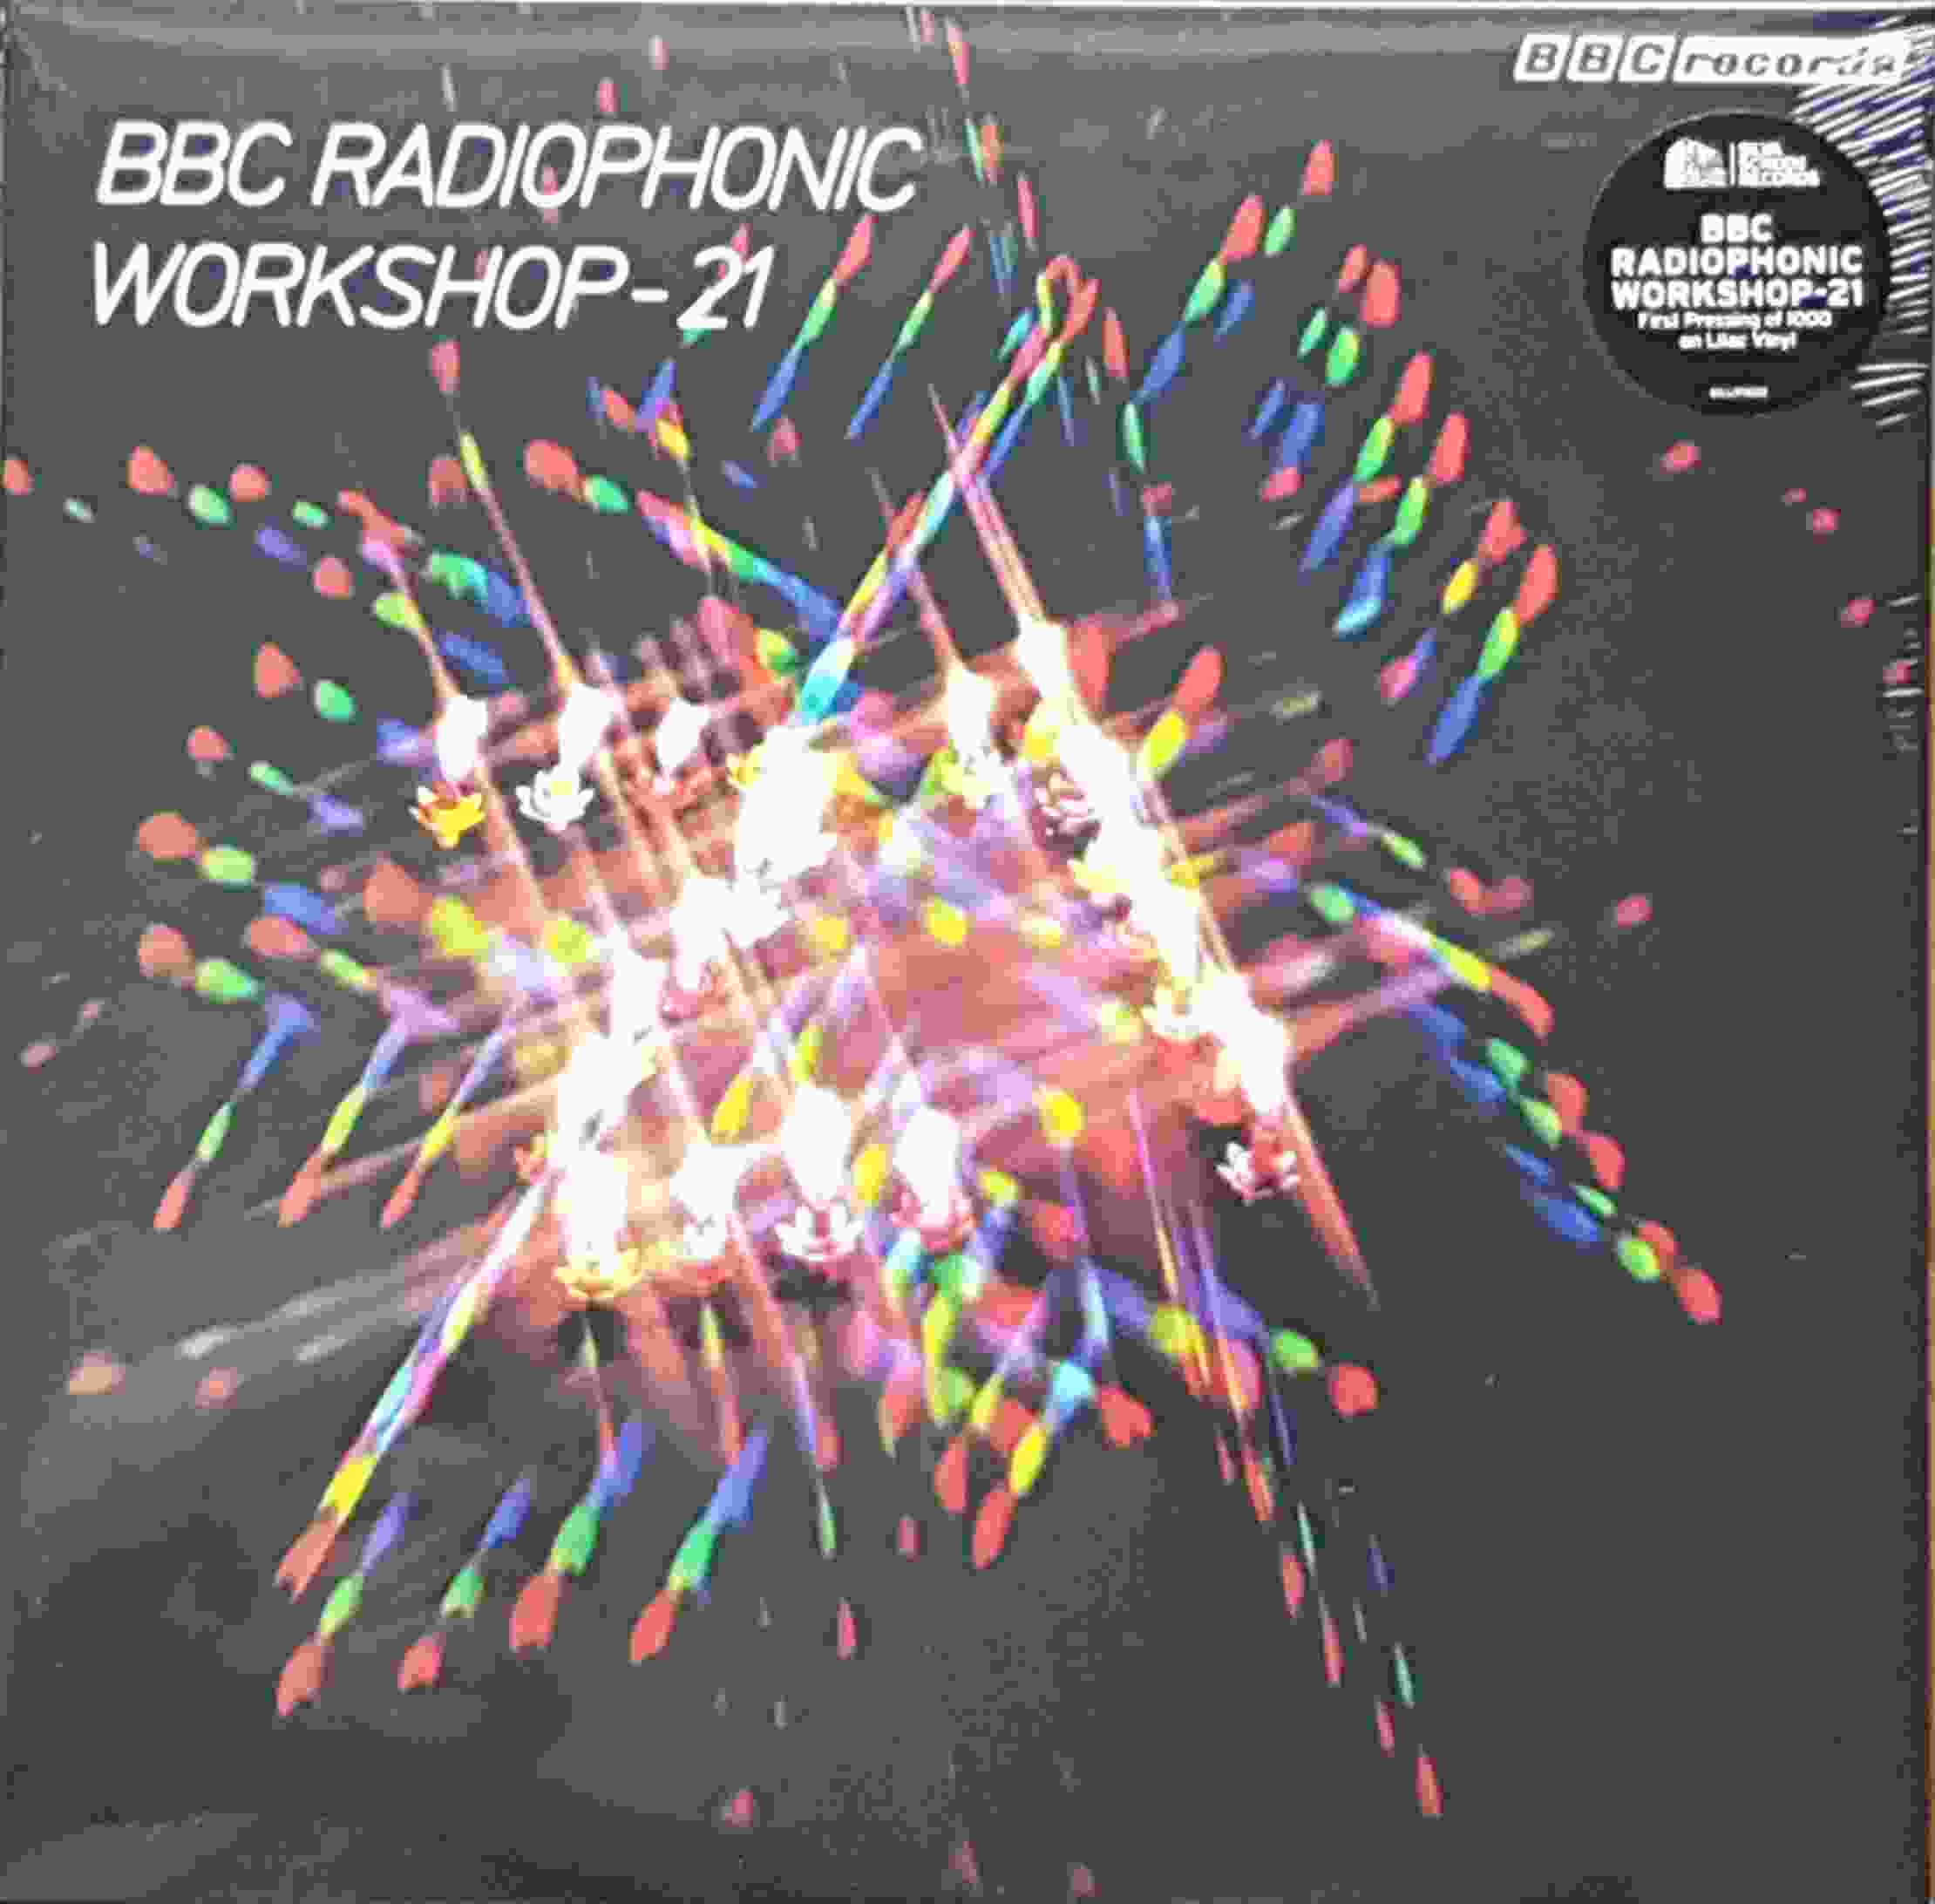 Picture of BBC Radiophonic Workshop 21 by artist Various from the BBC albums - Records and Tapes library